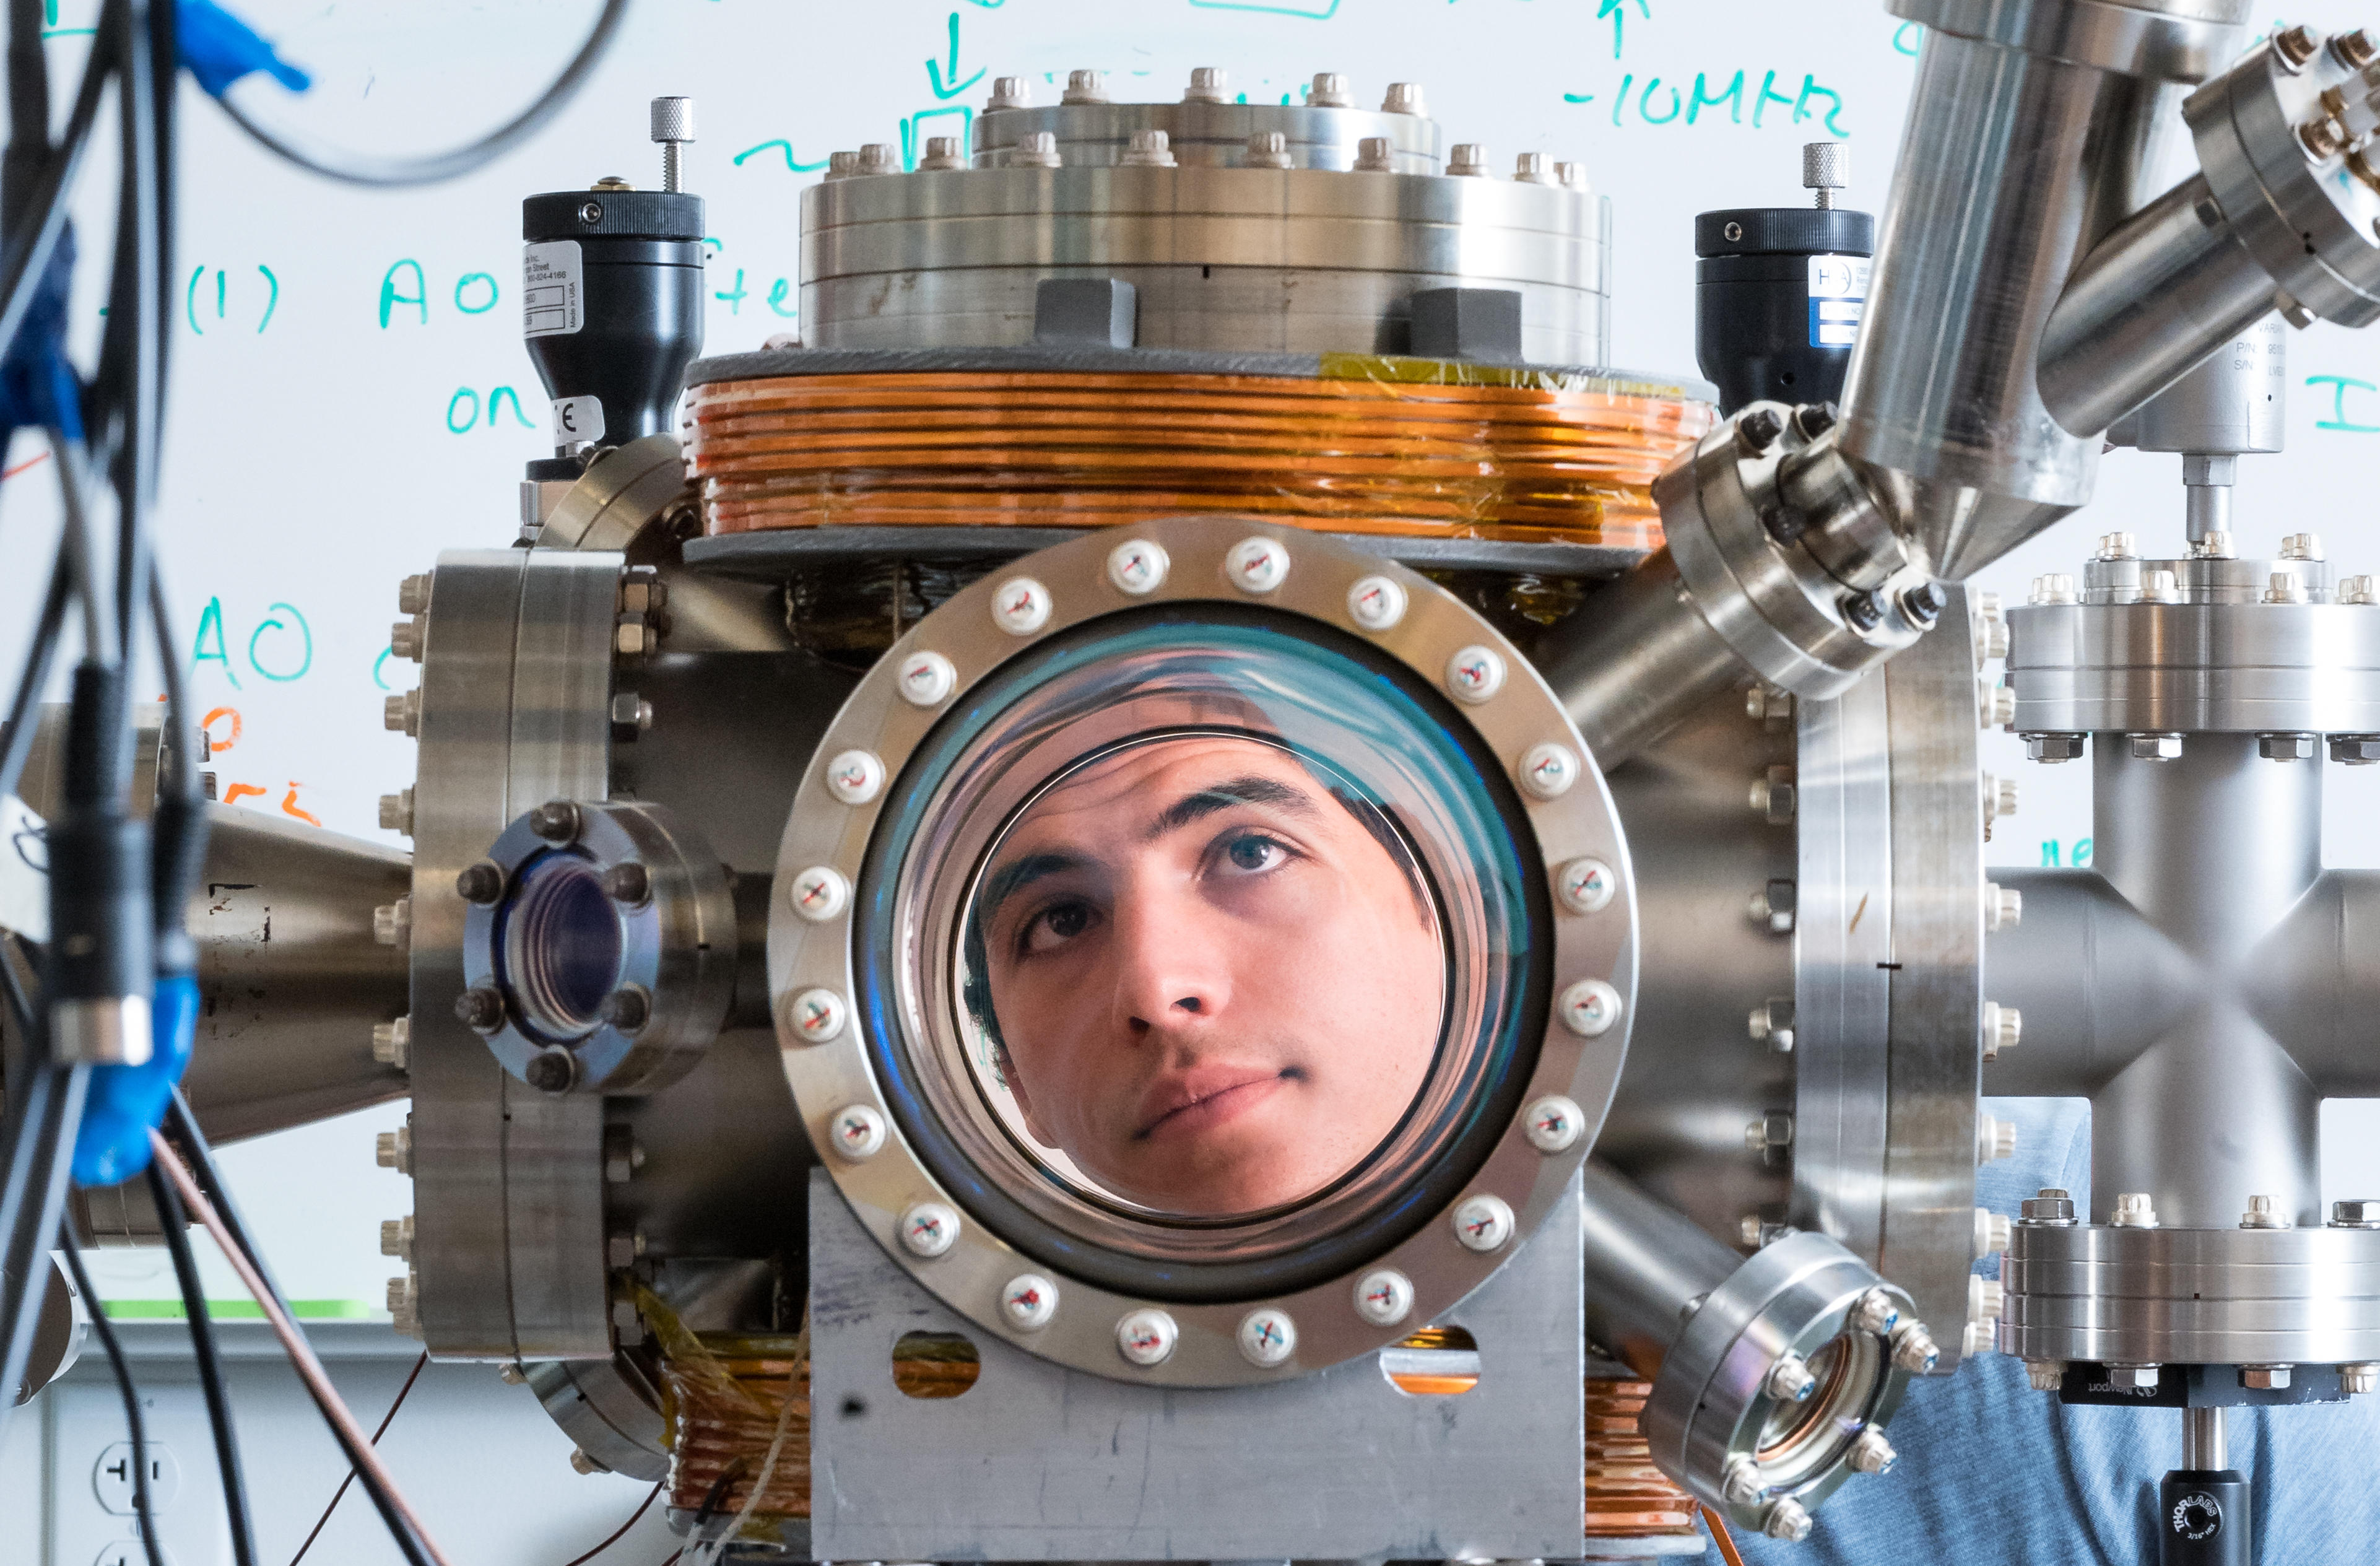 Nicholas Esparza looks through the high vacuum chamber in the ultracold lab.